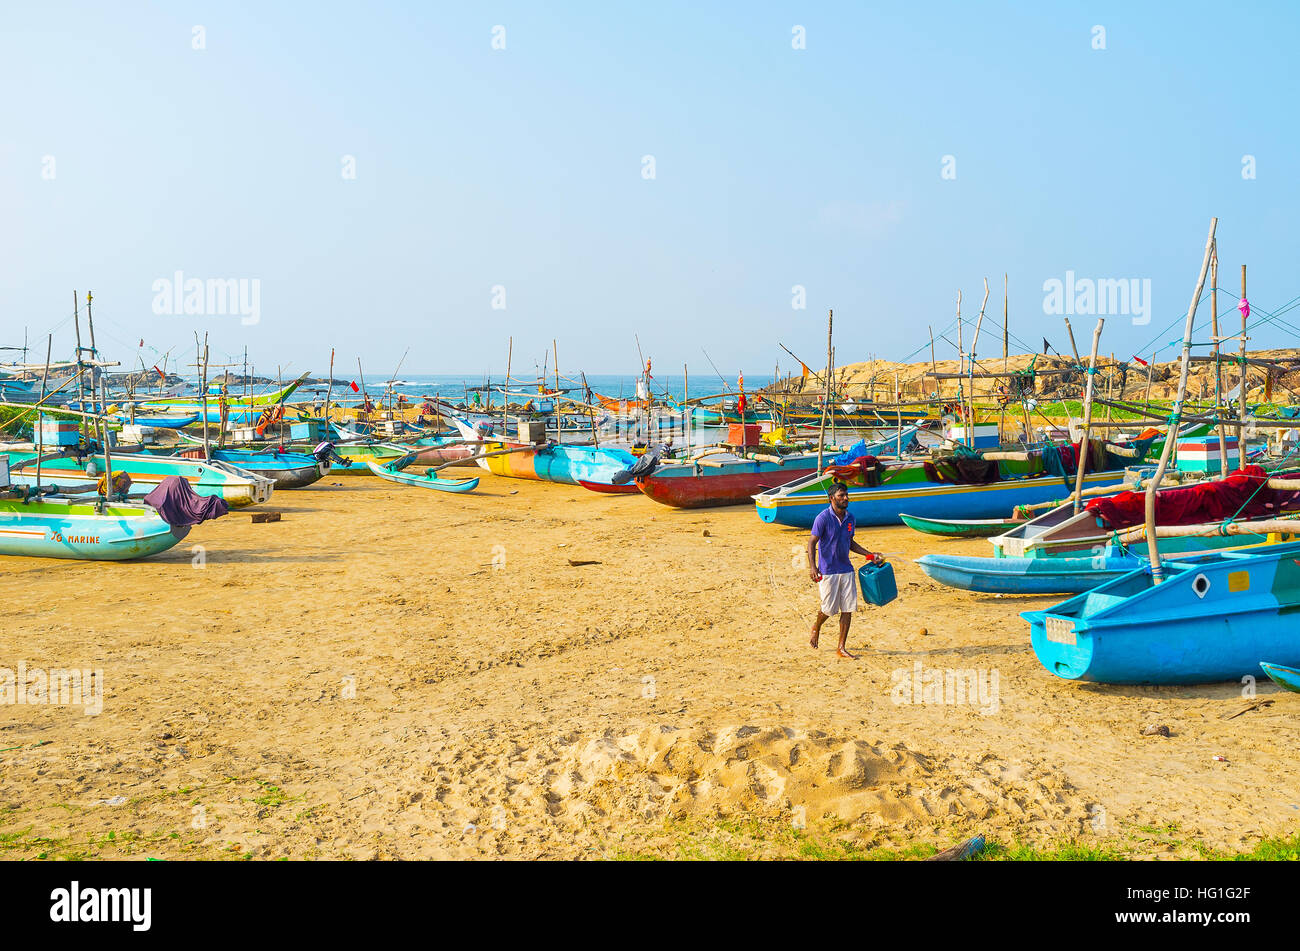 The traditional catamaran-boats, painted in different colors, on the sand at the fishing harbor Stock Photo